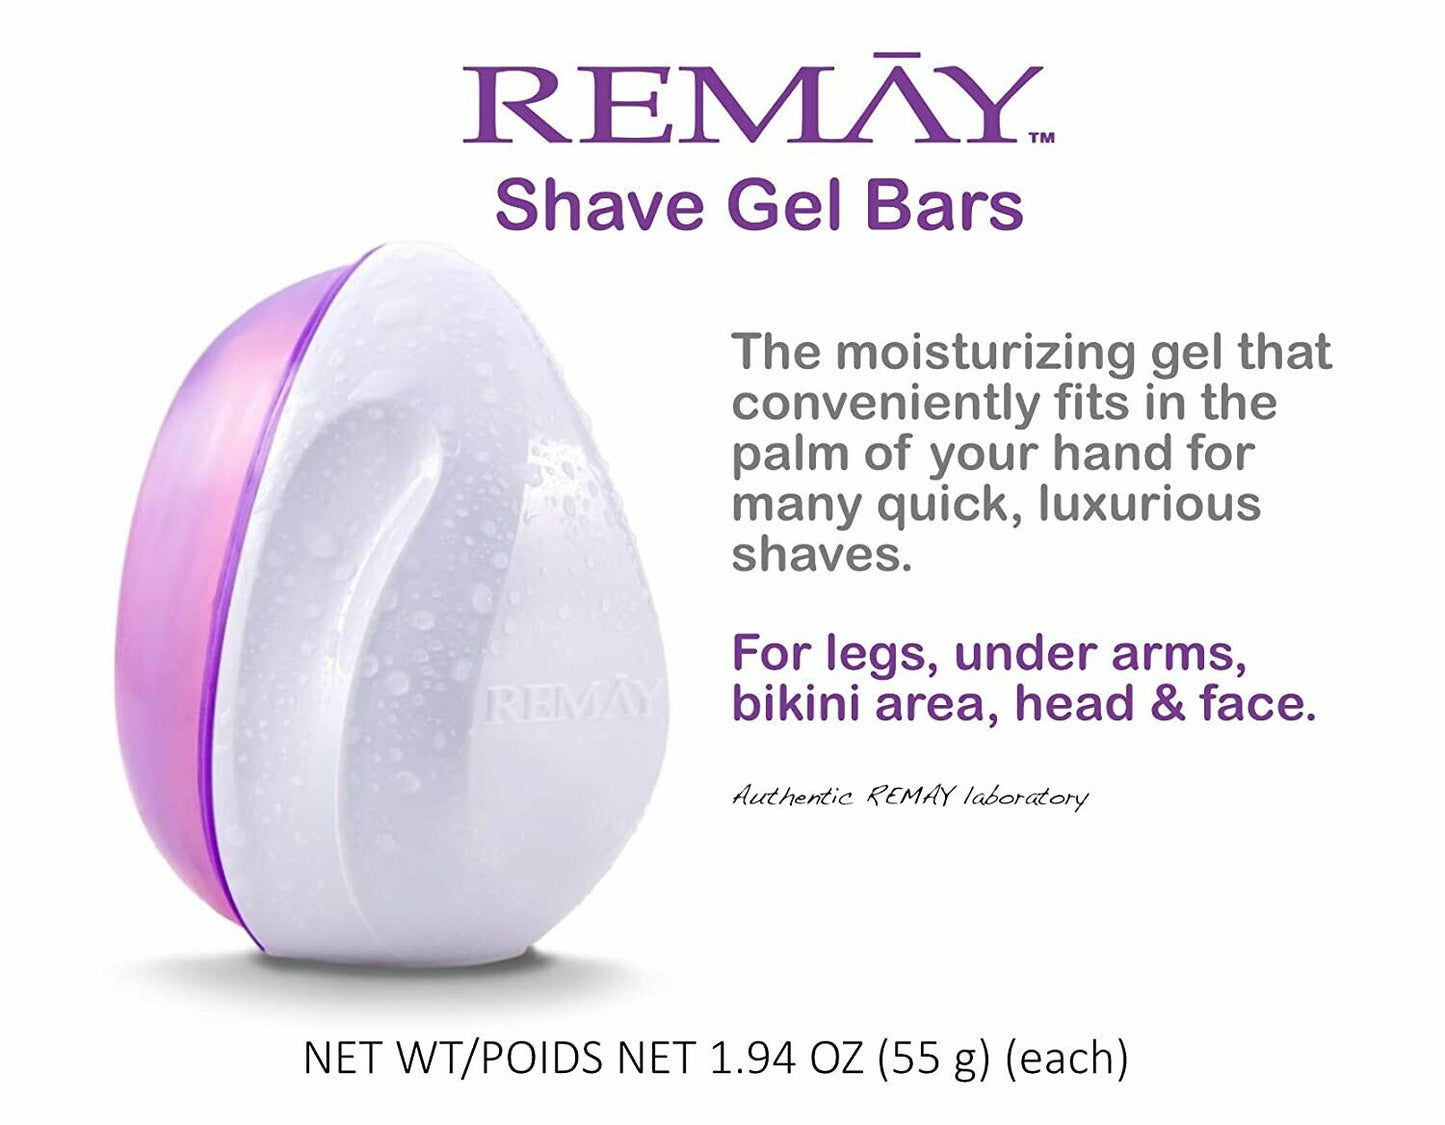 REMAY Glide Shave | 3 PACK